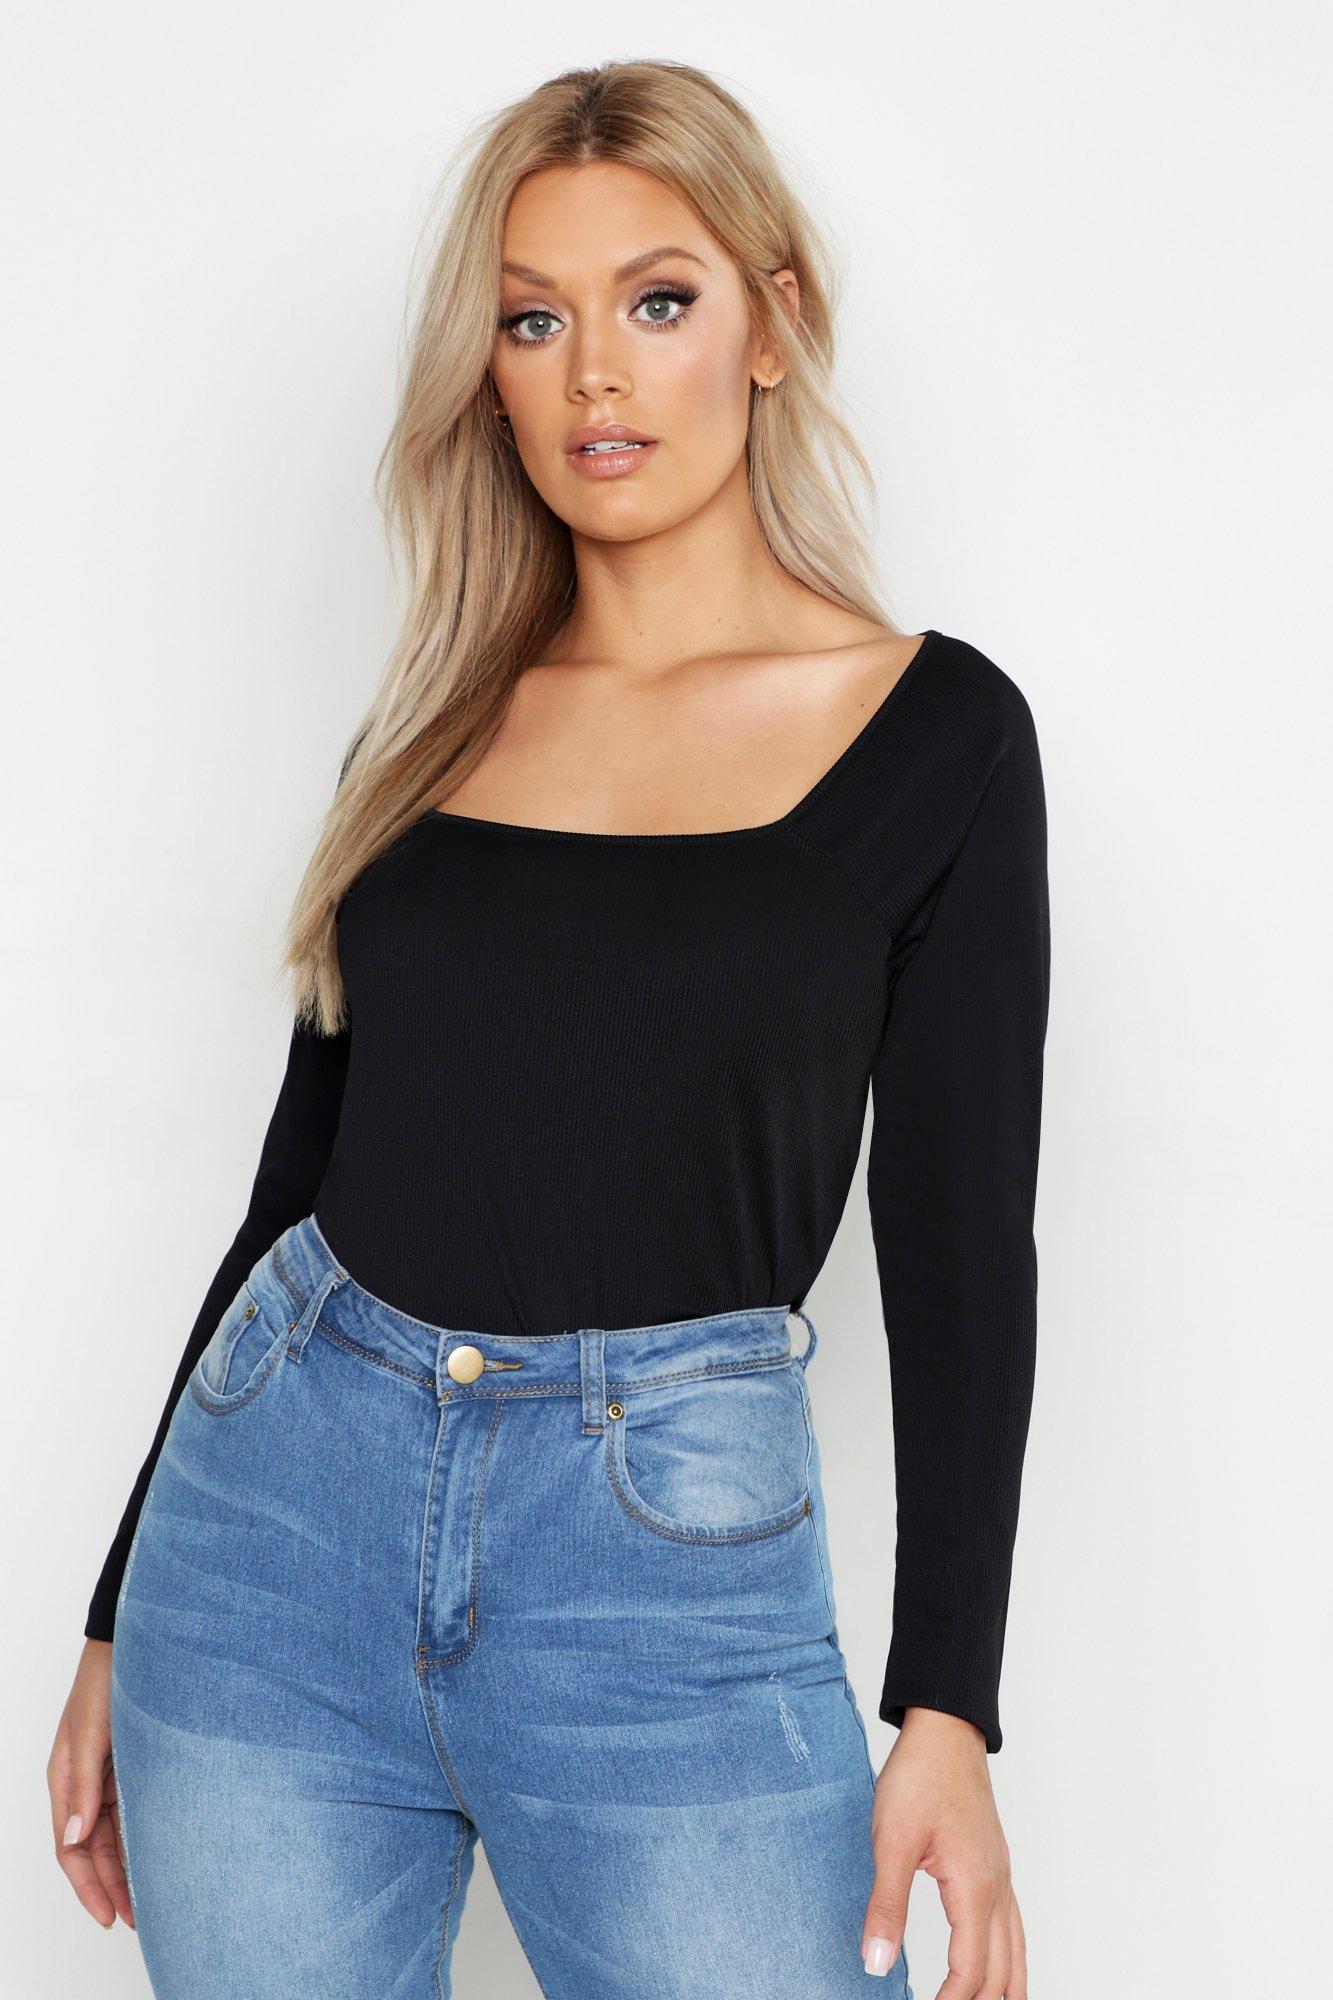 Boohoo Womens Plus Rib Square Neck Fitted Top | eBay